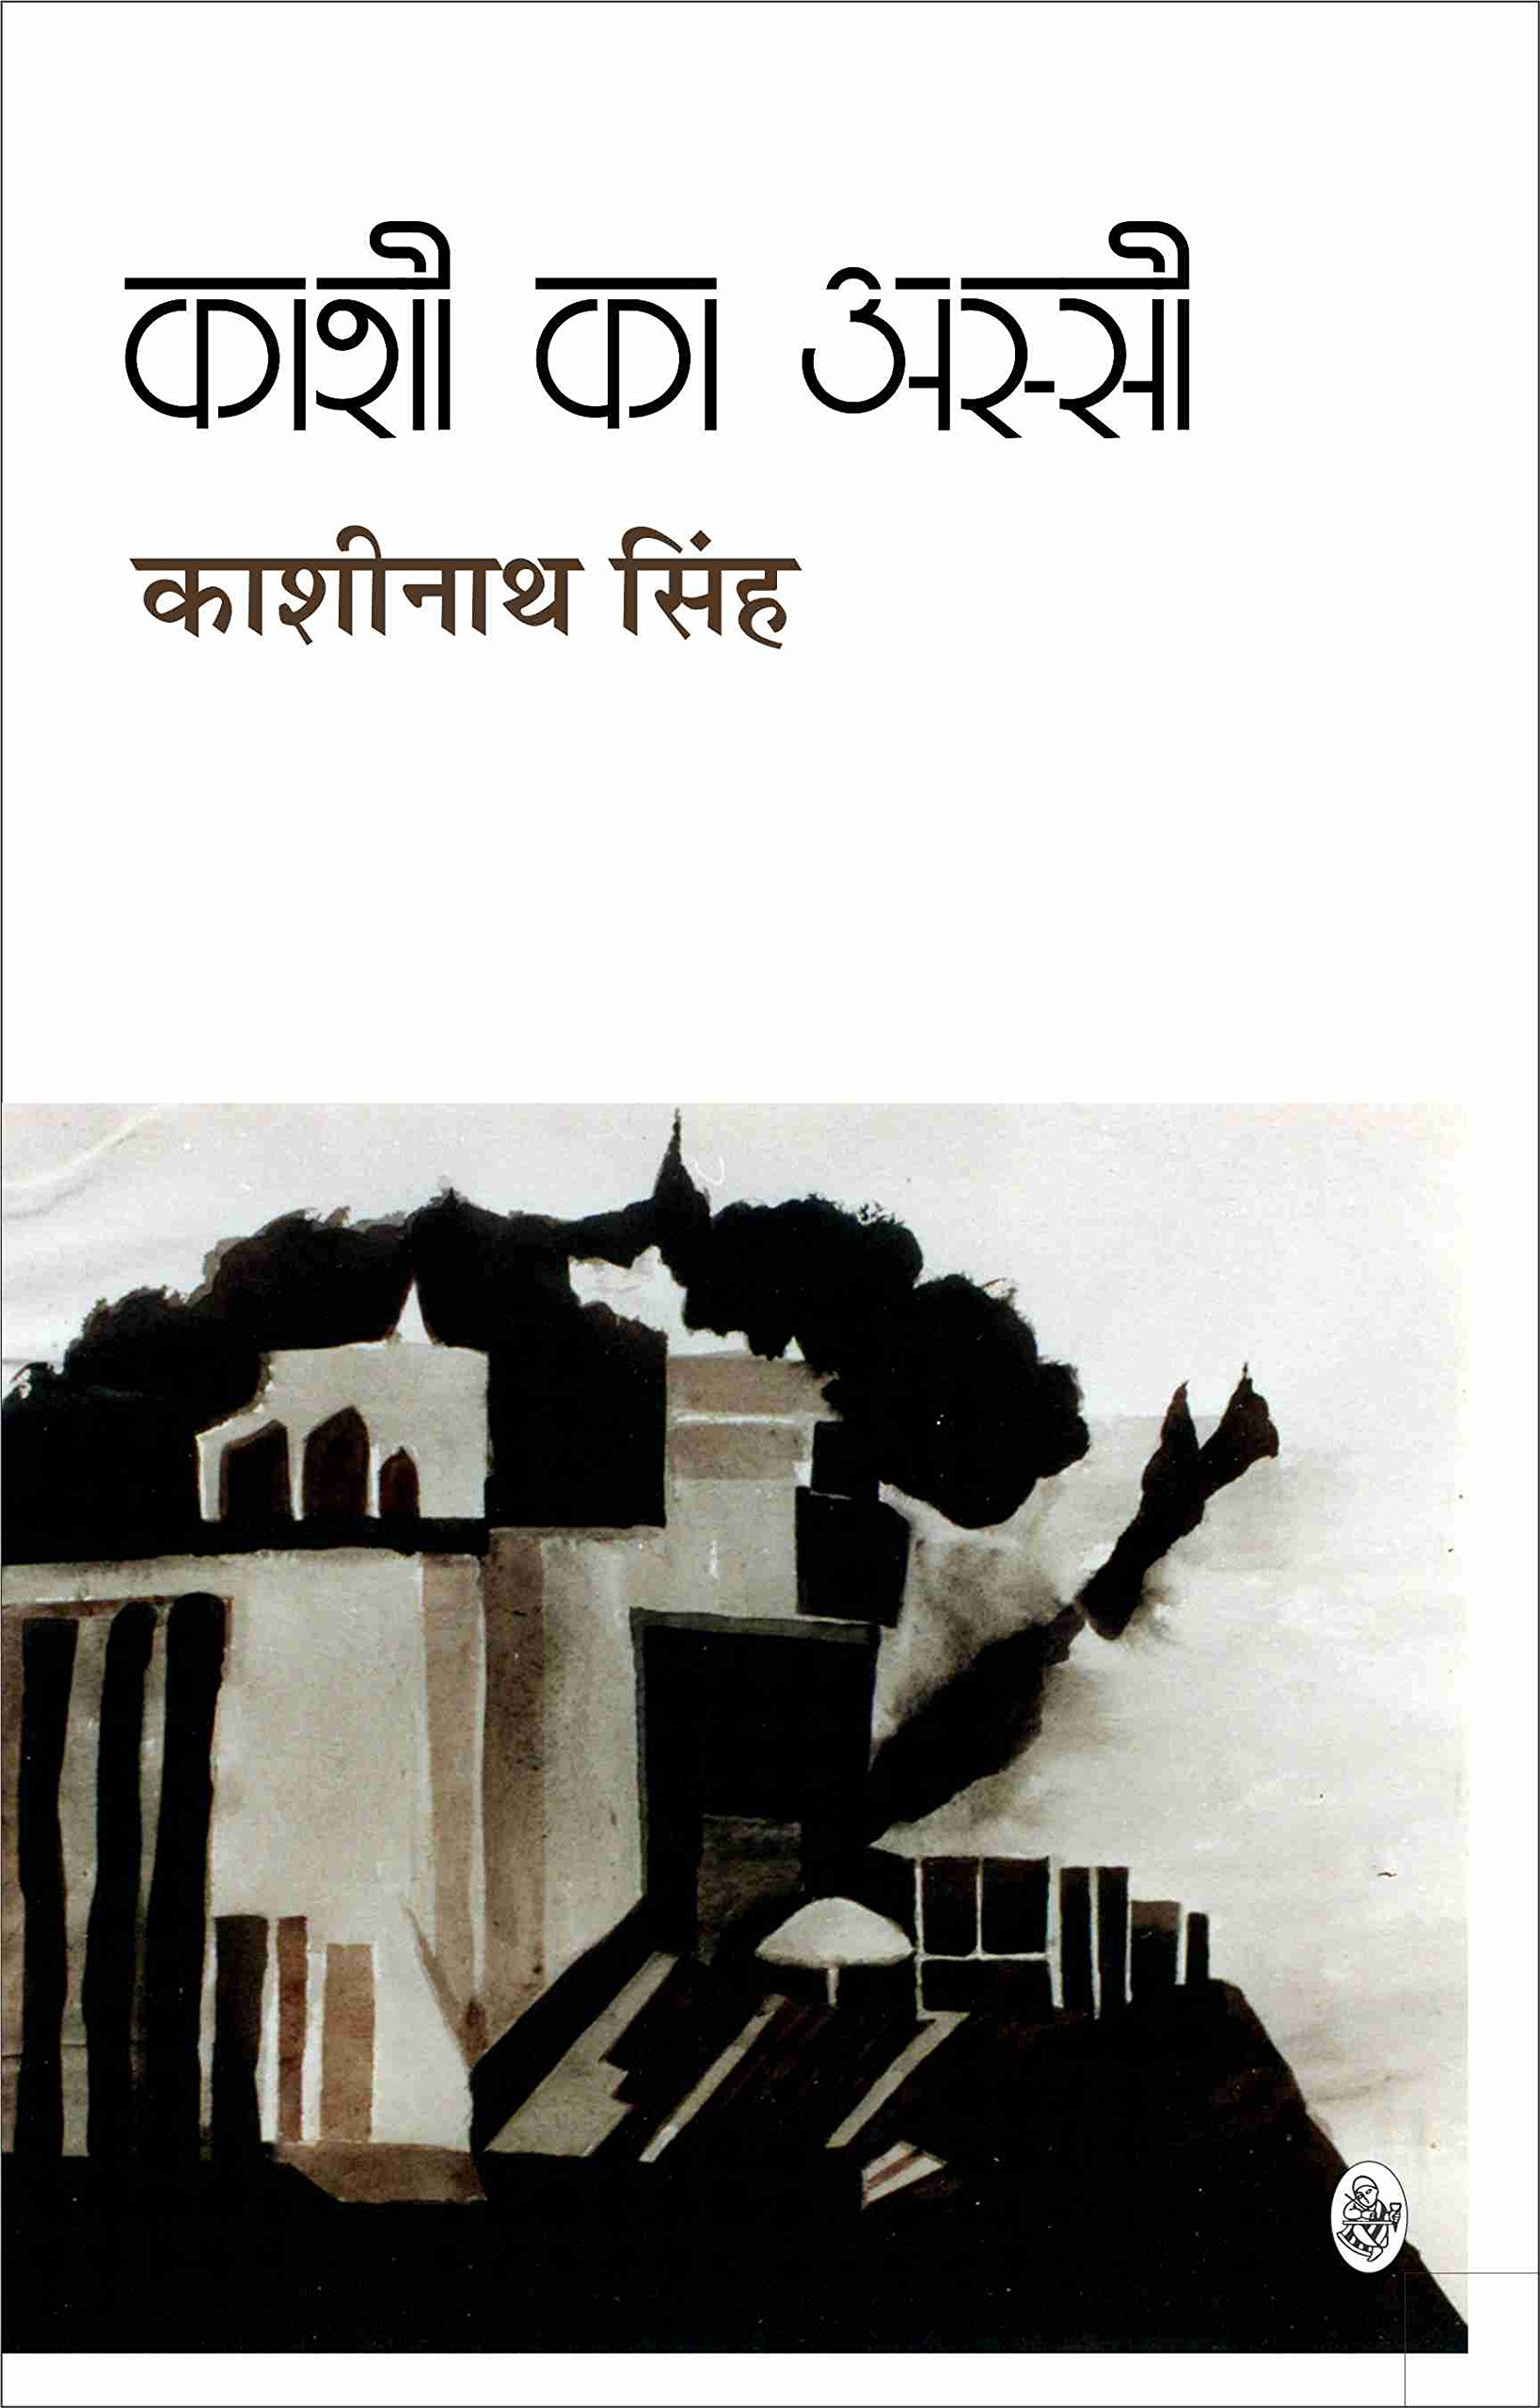 book review example in hindi